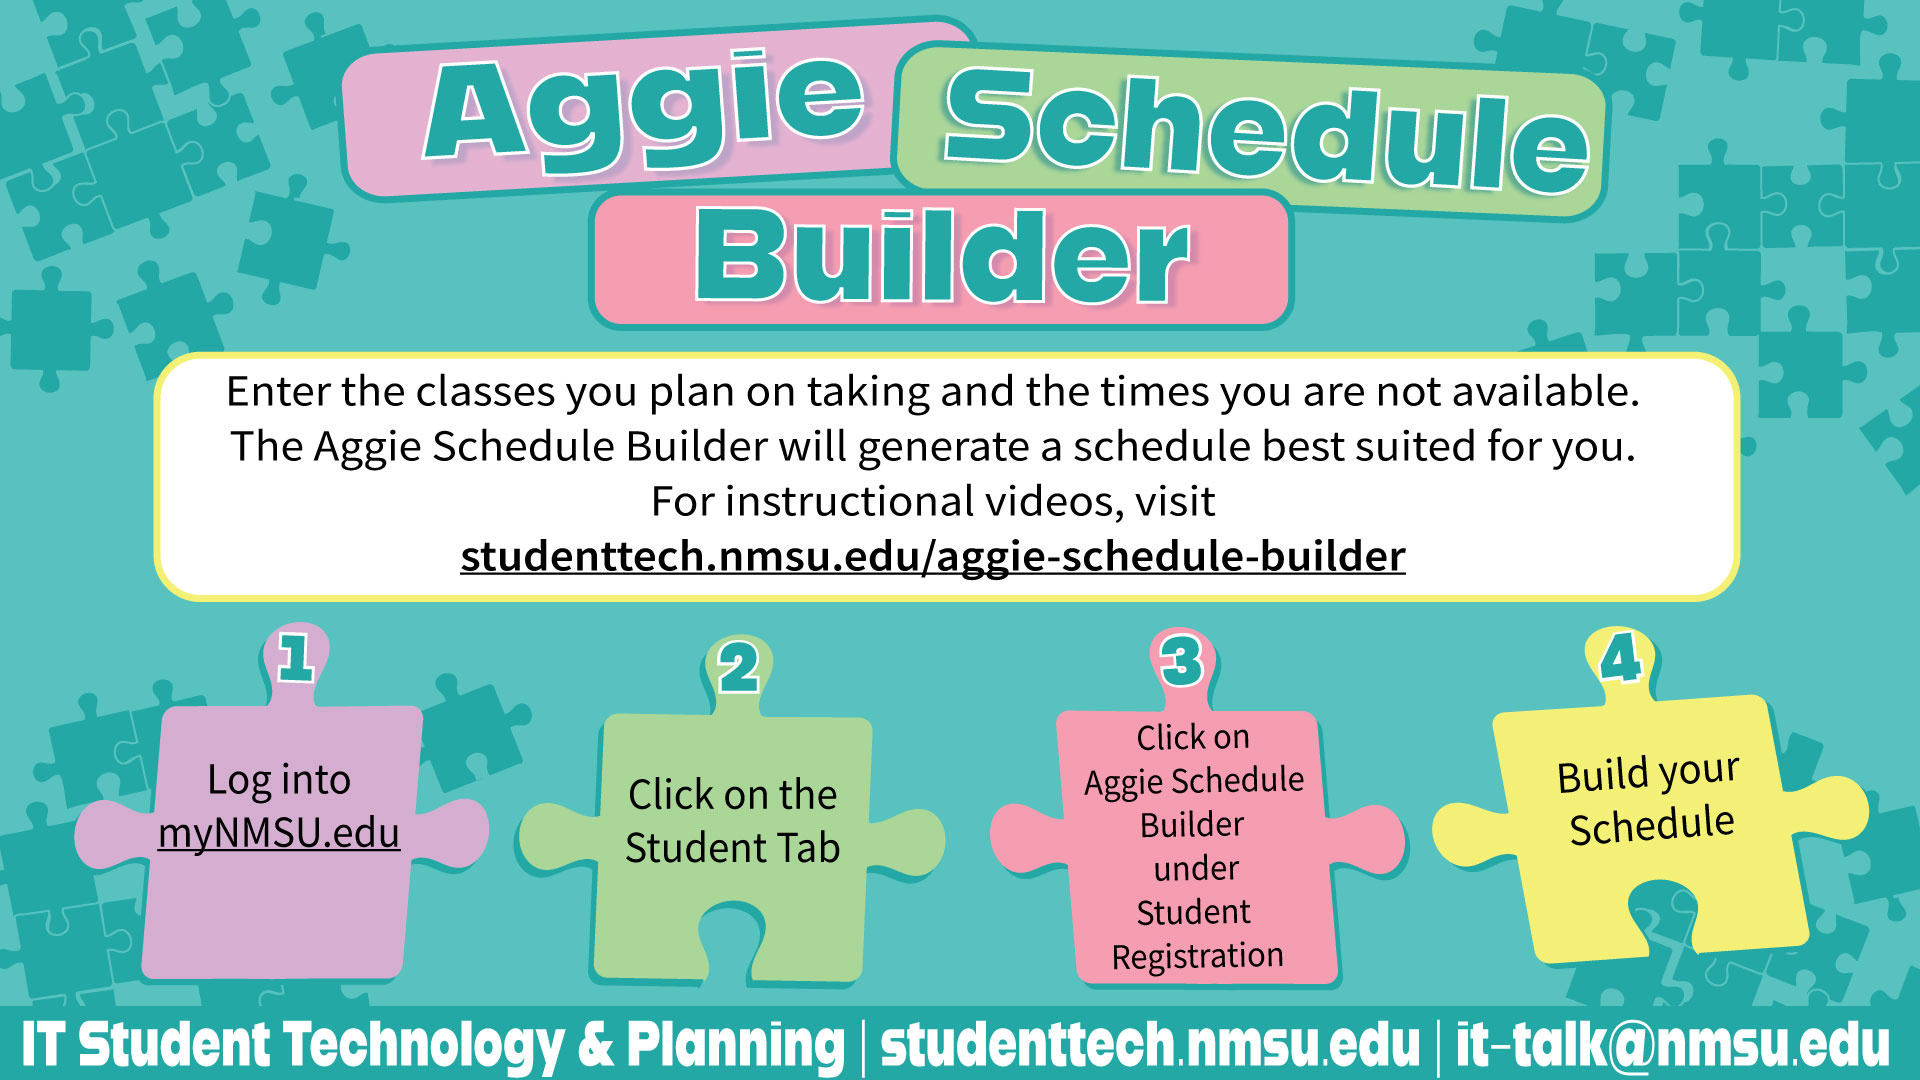 Aggie Schedule Builder. Enter the classes you plan to take and the times you are not available. The Aggie Schedule Builder will generate a schedule best suited for you. For instructional videos, visit studenttech.nmsu.edu/aggie-schedule-builder.